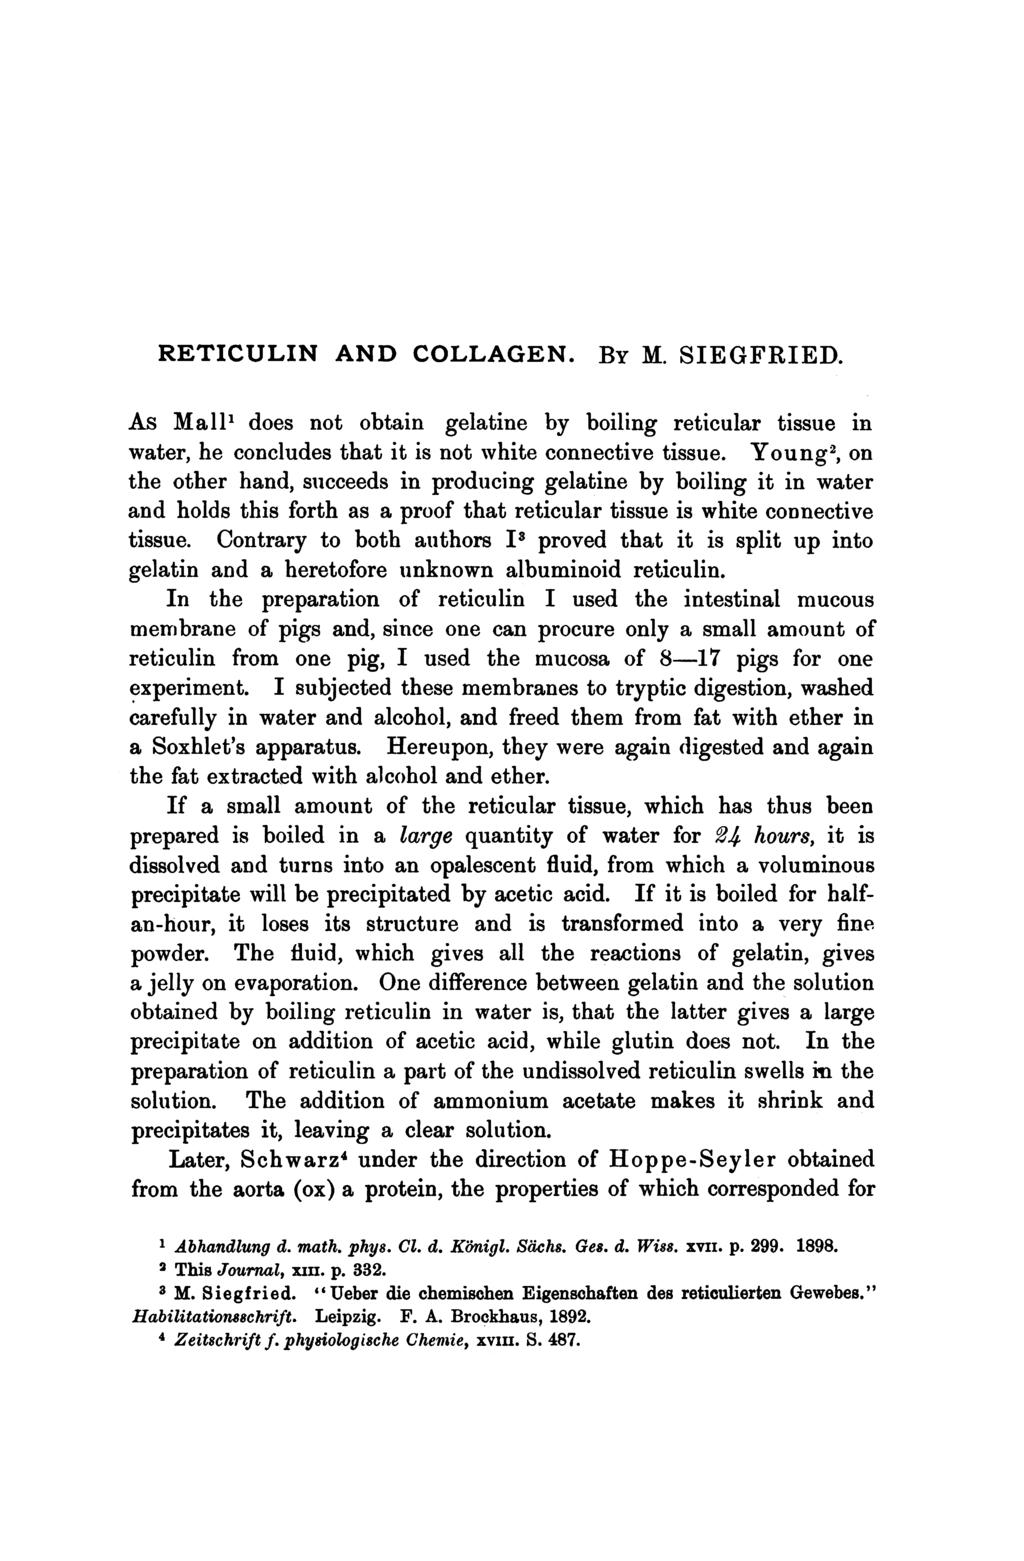 RETICULIN AND COLLAGEN. BY M. SIEGFRIED. As Mall, does not obtain gelatine by boiling reticular tissue in water, he concludes that it is not white connective tissue.